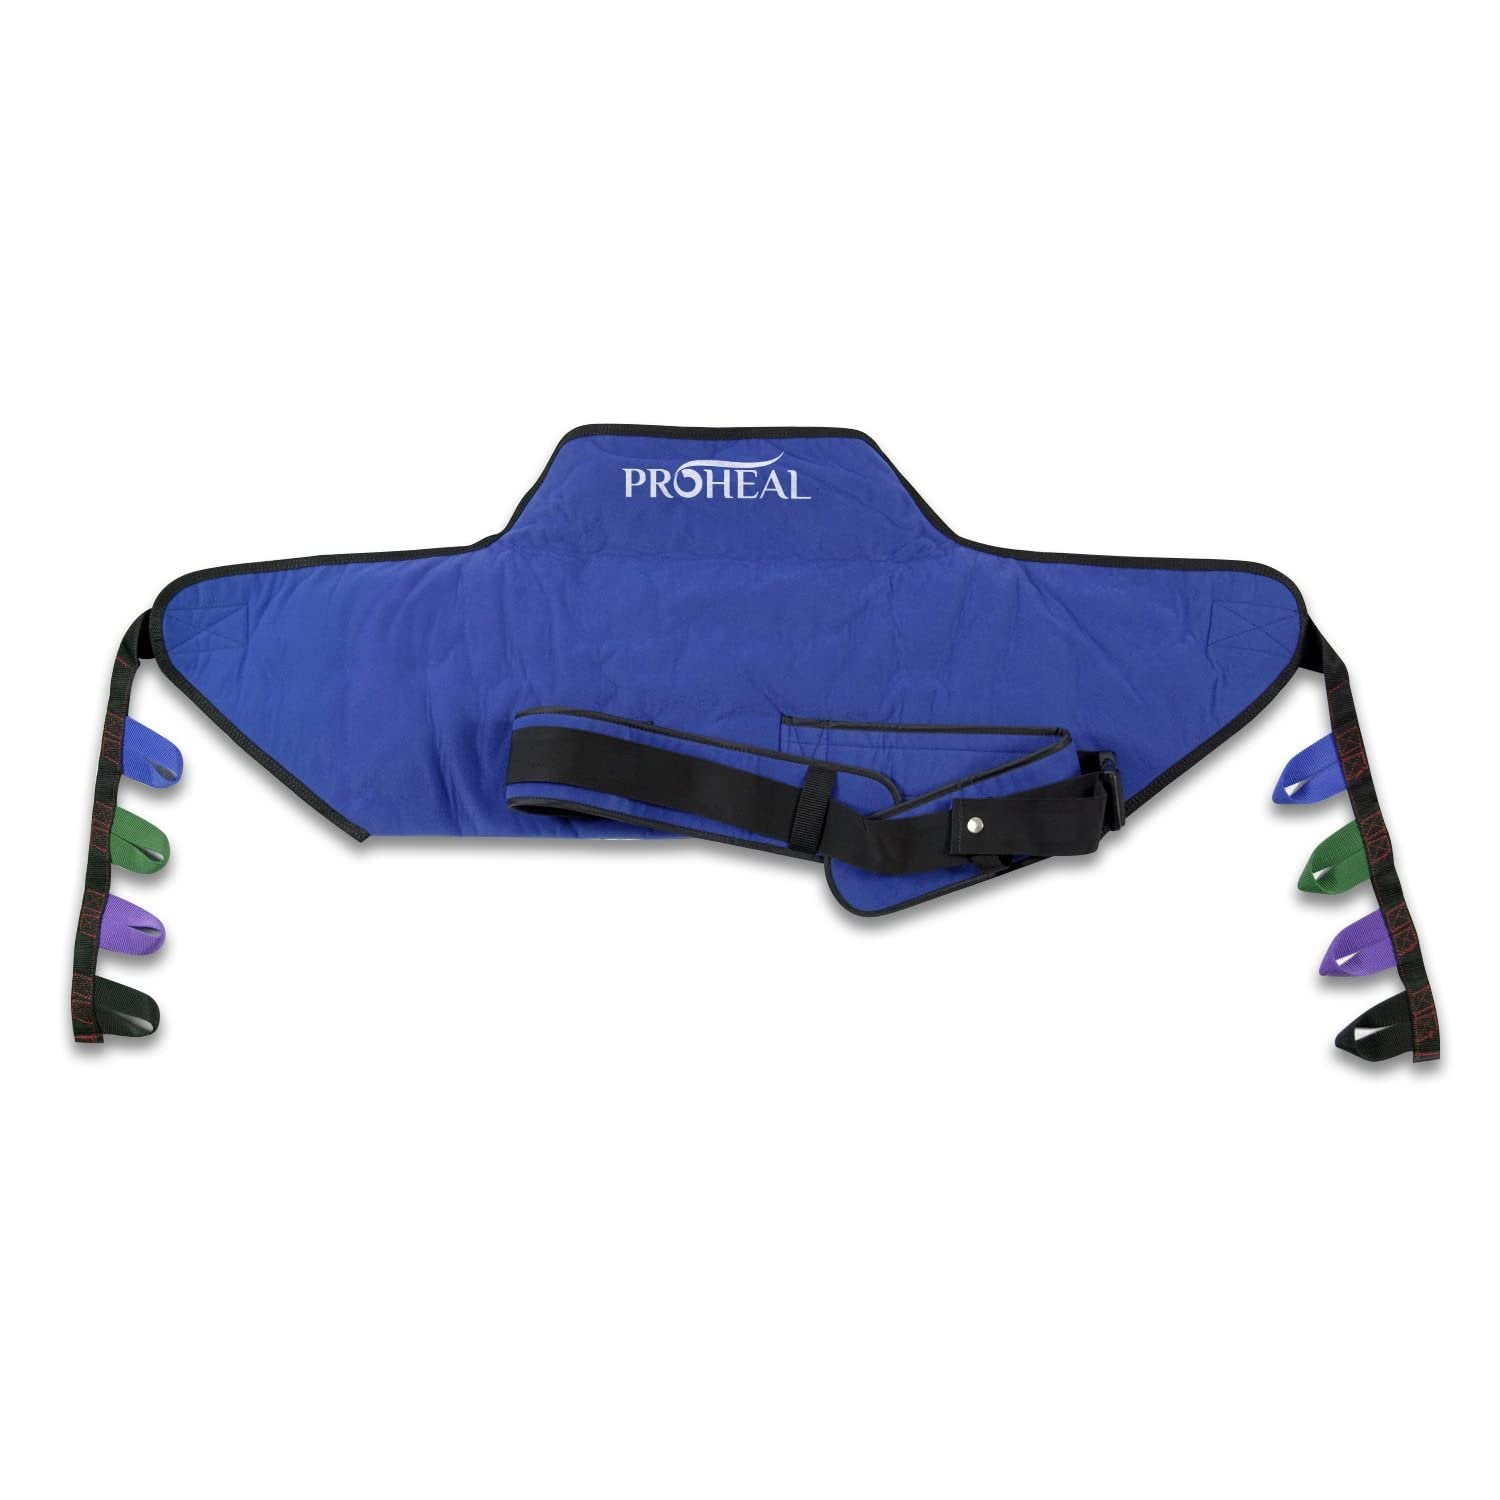 ProHeal Universal Sit to Stand Lift Sling, Medium - Polyester Slings for Patient Lifts - Compatible with Hoyer, Invacare, McKesson, Drive, Lumex, Joerns and More